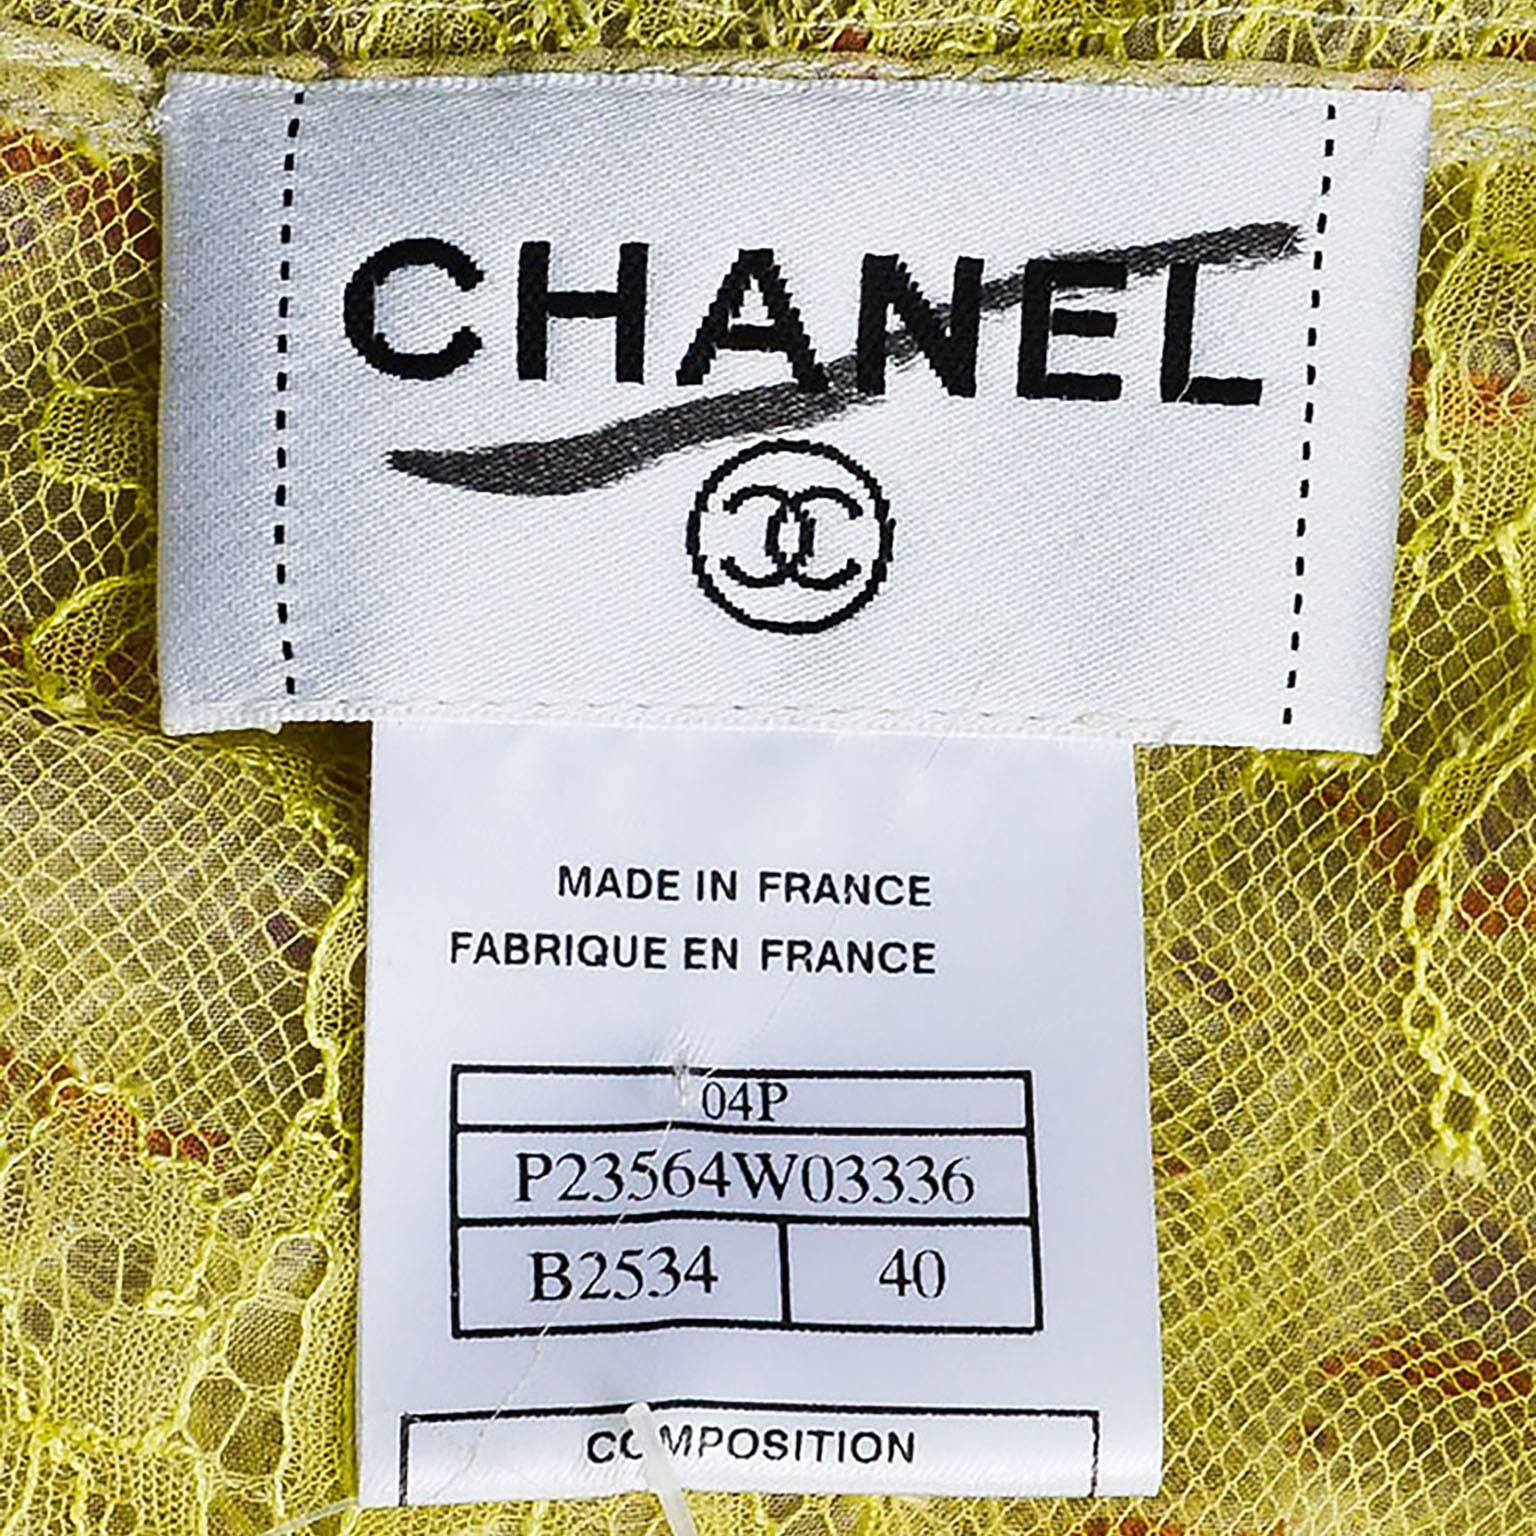 Chanel 2004 Spring Runway Green Multicolor Silk Chiffon Embellished Floral Dress In Excellent Condition For Sale In Chicago, IL